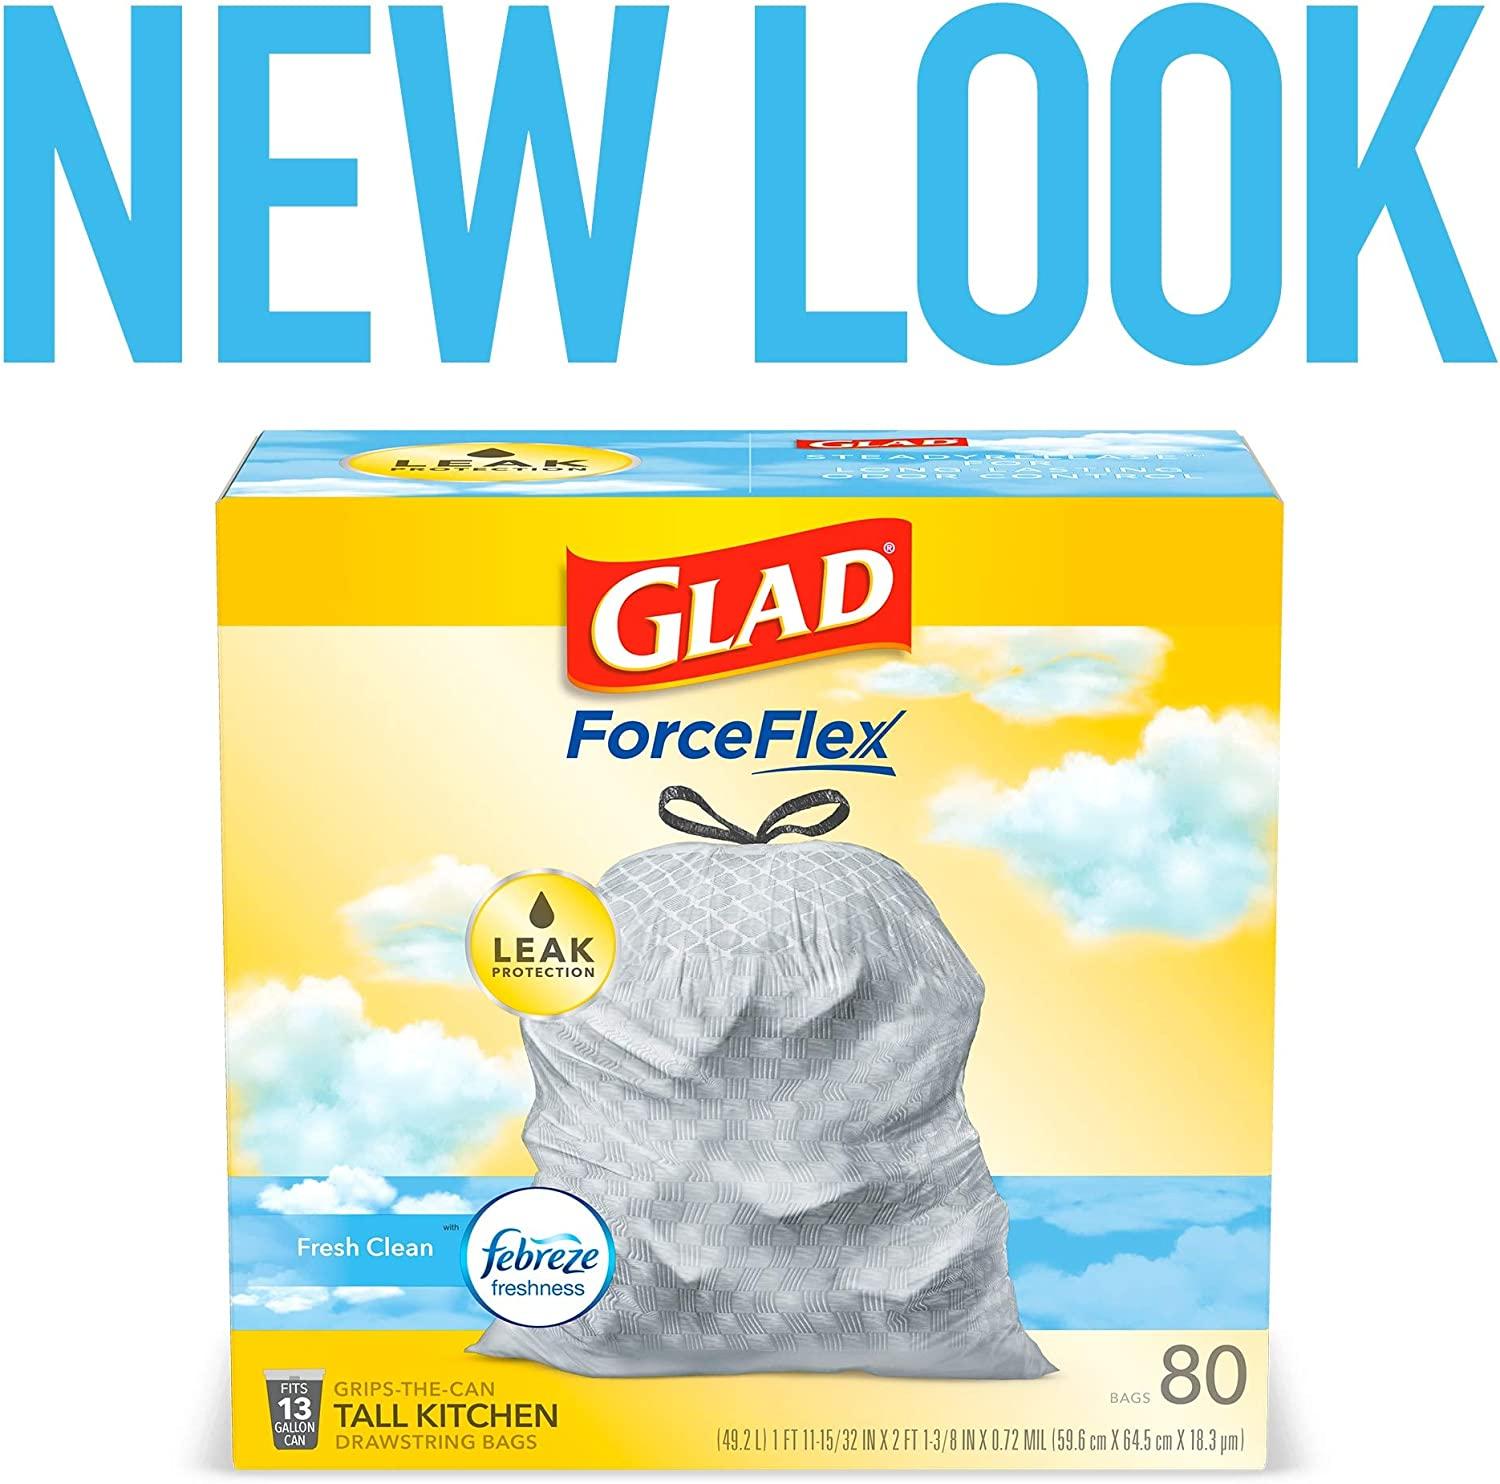 Glad ForceFlex MaxStrength with Febreze Fresh Clean Scent Extra Large  Kitchen Drawstring Trash Bags, 30 ct - Kroger